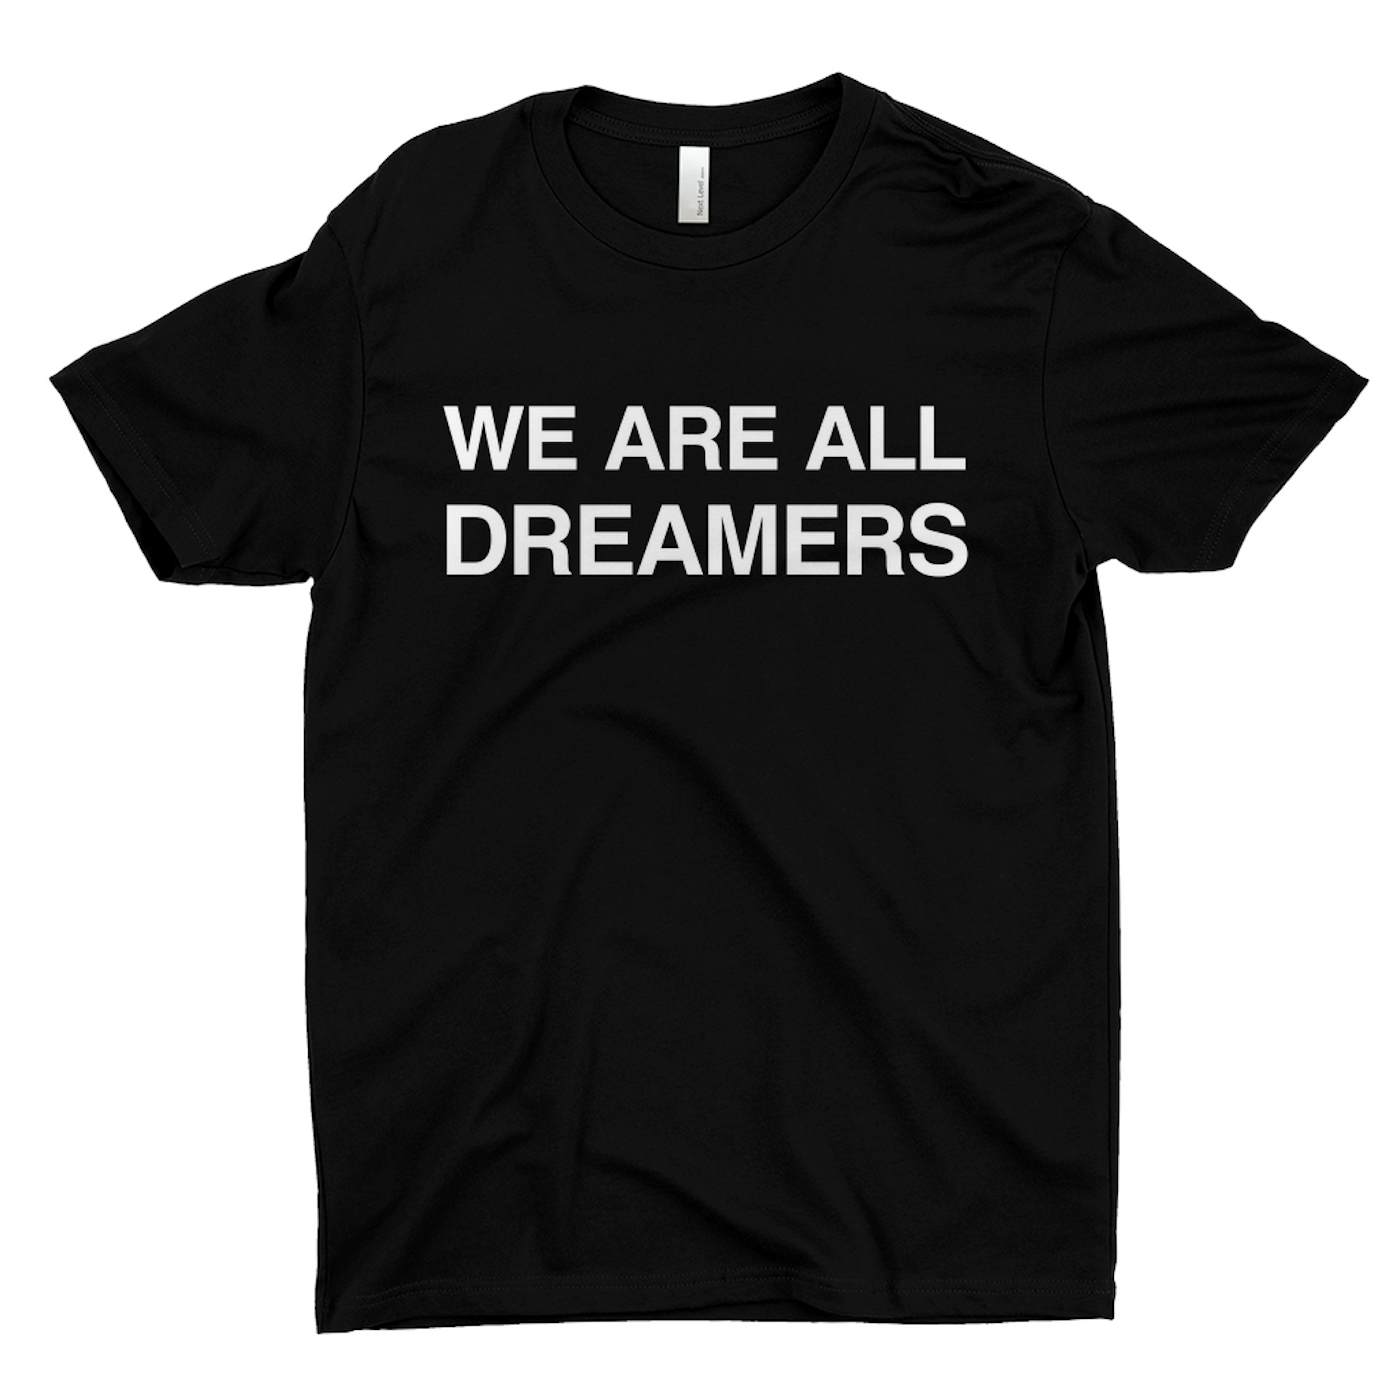 Selena Gomez T-Shirt | We Are All Dreamers Worn By Selena Gomez Selena Gomez Shirt